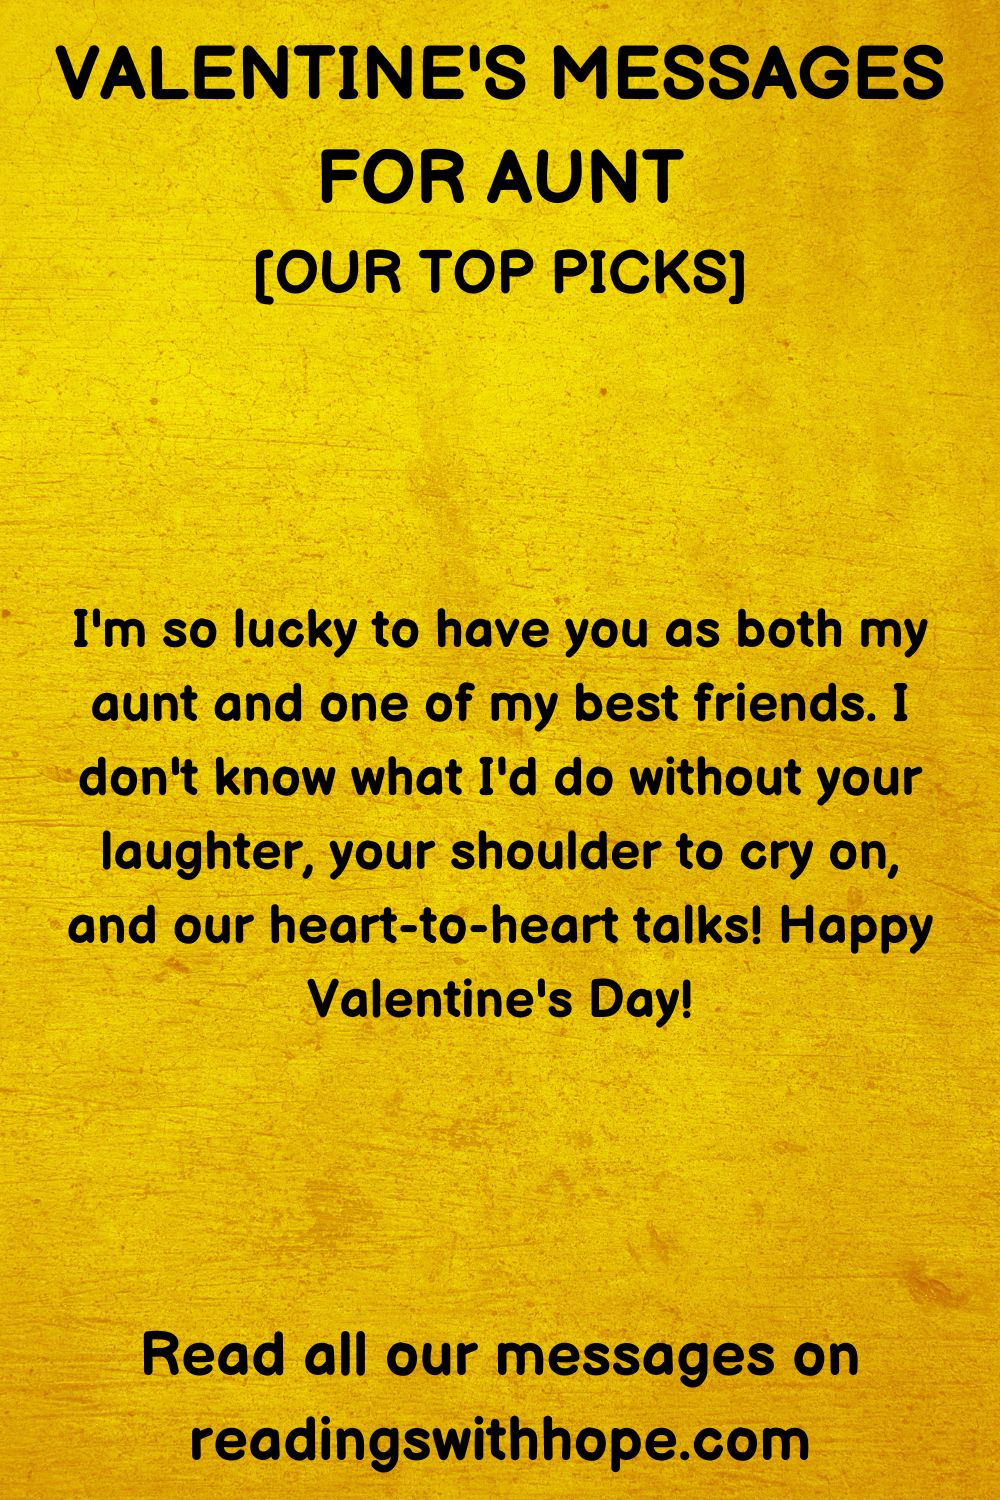 40 Valentine's Messages for Aunt